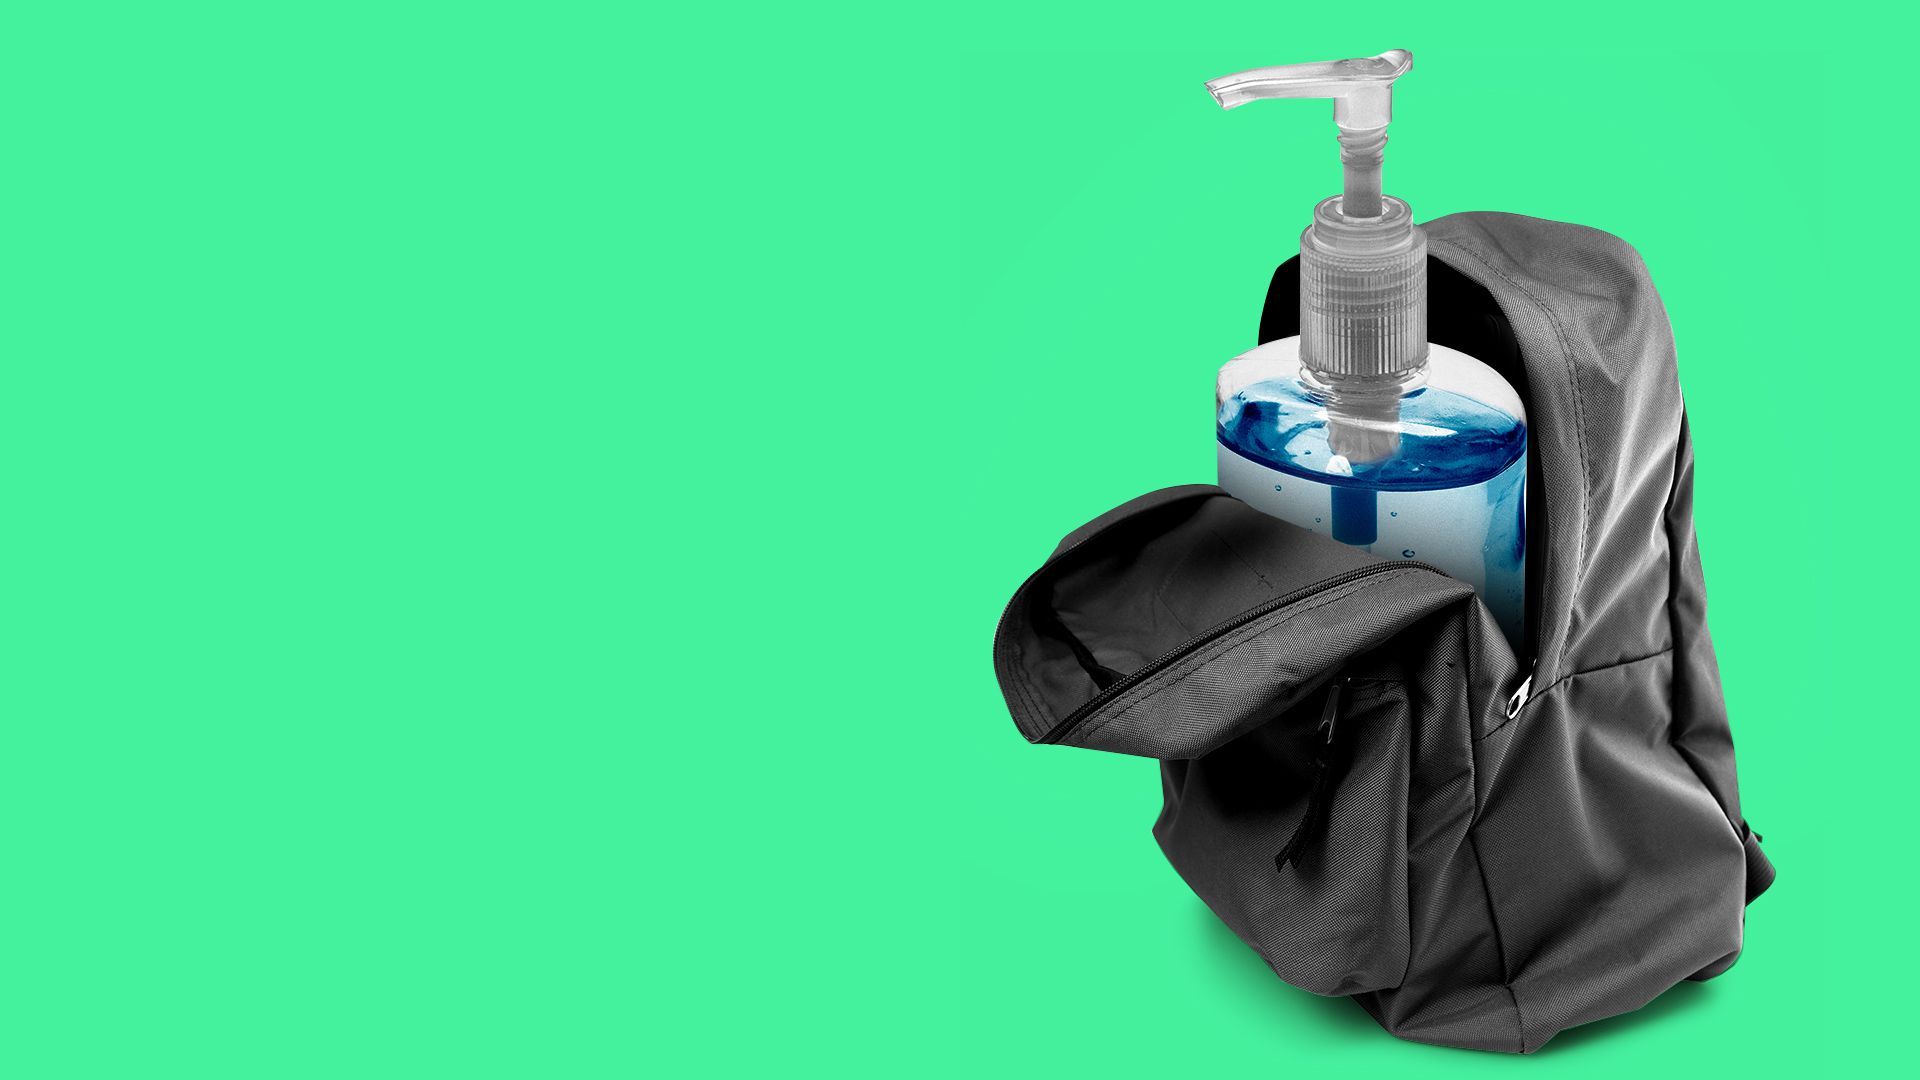 Illustration of an open backpack with a giant bottle of hand sanitizer in it.  